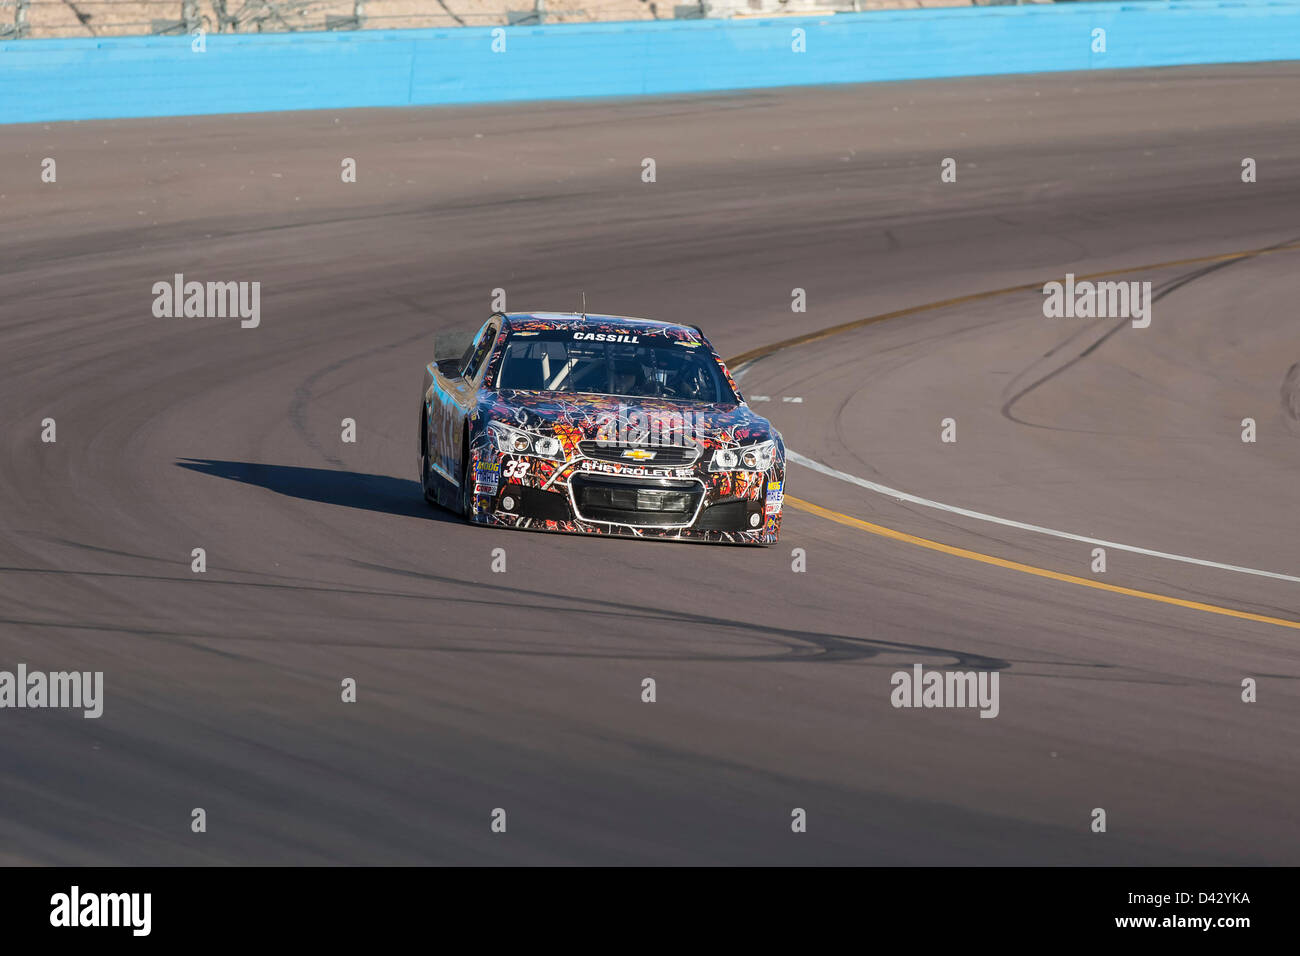 March 1, 2013 - Avondale, AZ, U.S. - AVONDALE, AZ - MAR 01, 2013: Landon Cassill (33) takes his car on the track and qualifies 38th for the Subway Fresh Fit 500 race at the Phoenix International Raceway in AVONDALE, AZ. Stock Photo